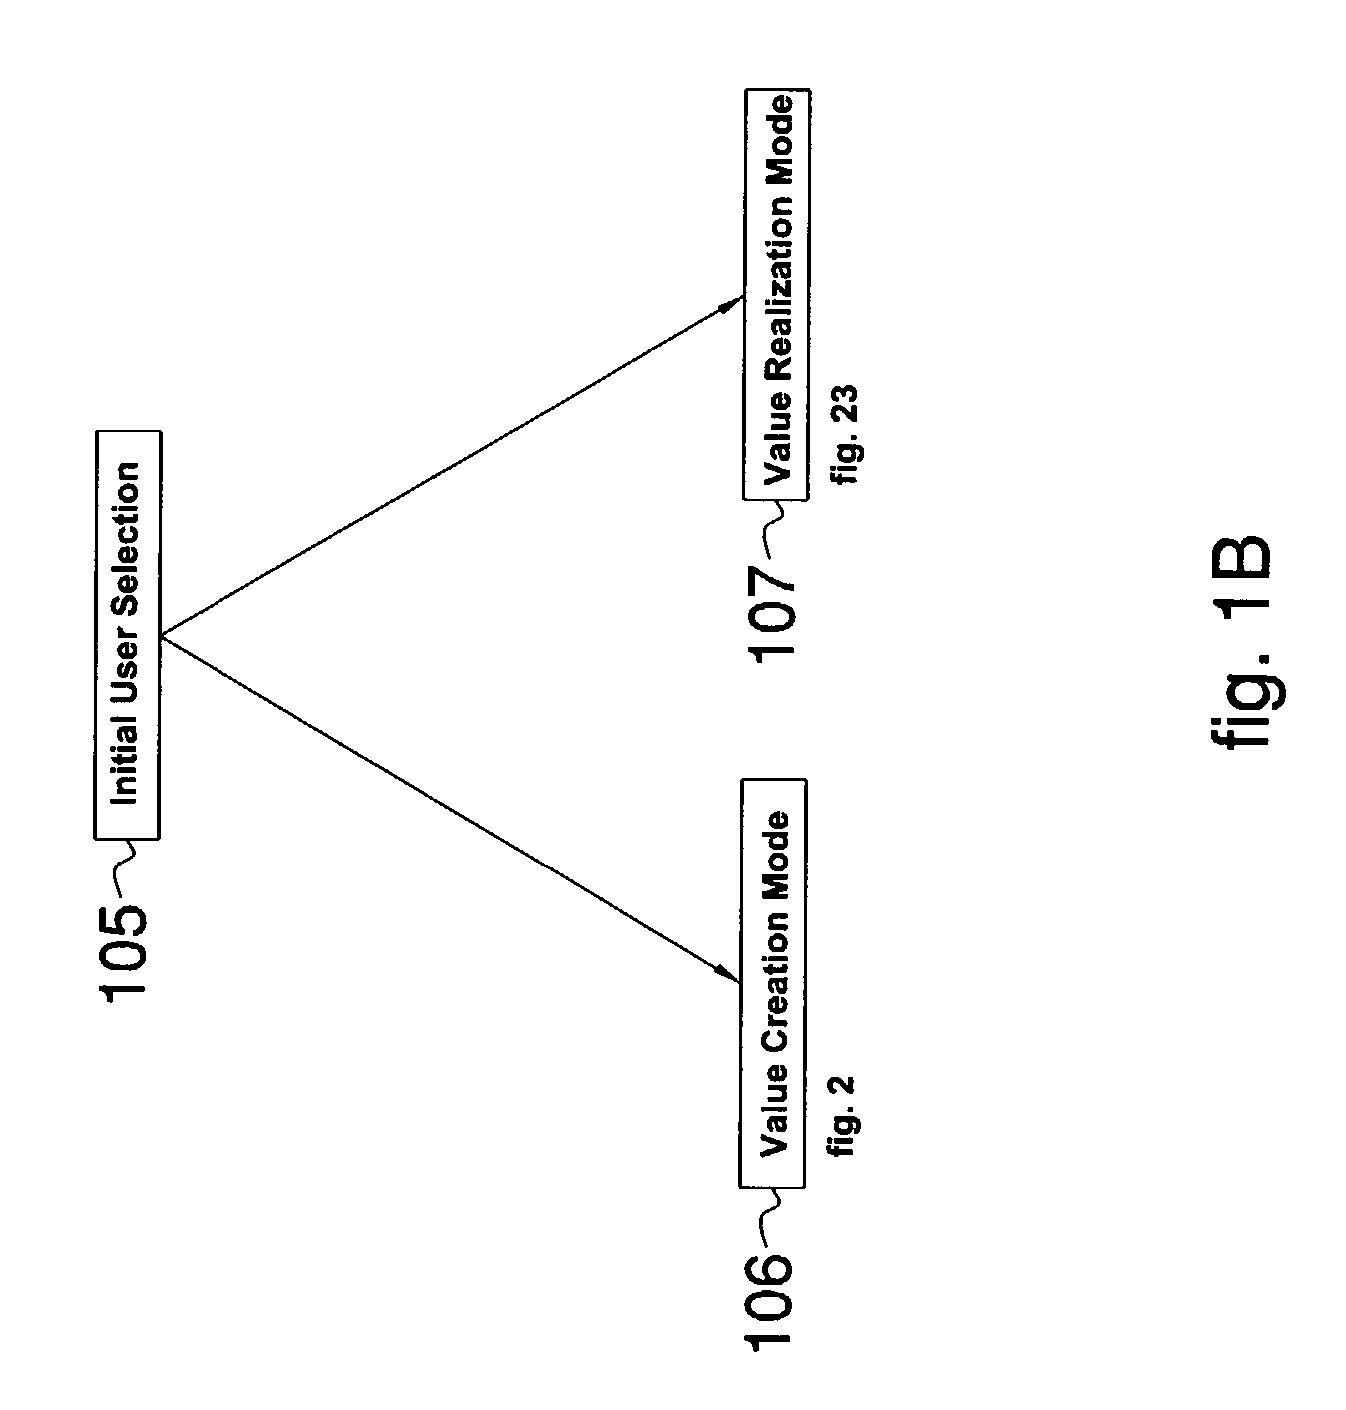 Continuously updated data processing system and method for measuring and reporting on value creation performance that supports real-time benchmarking